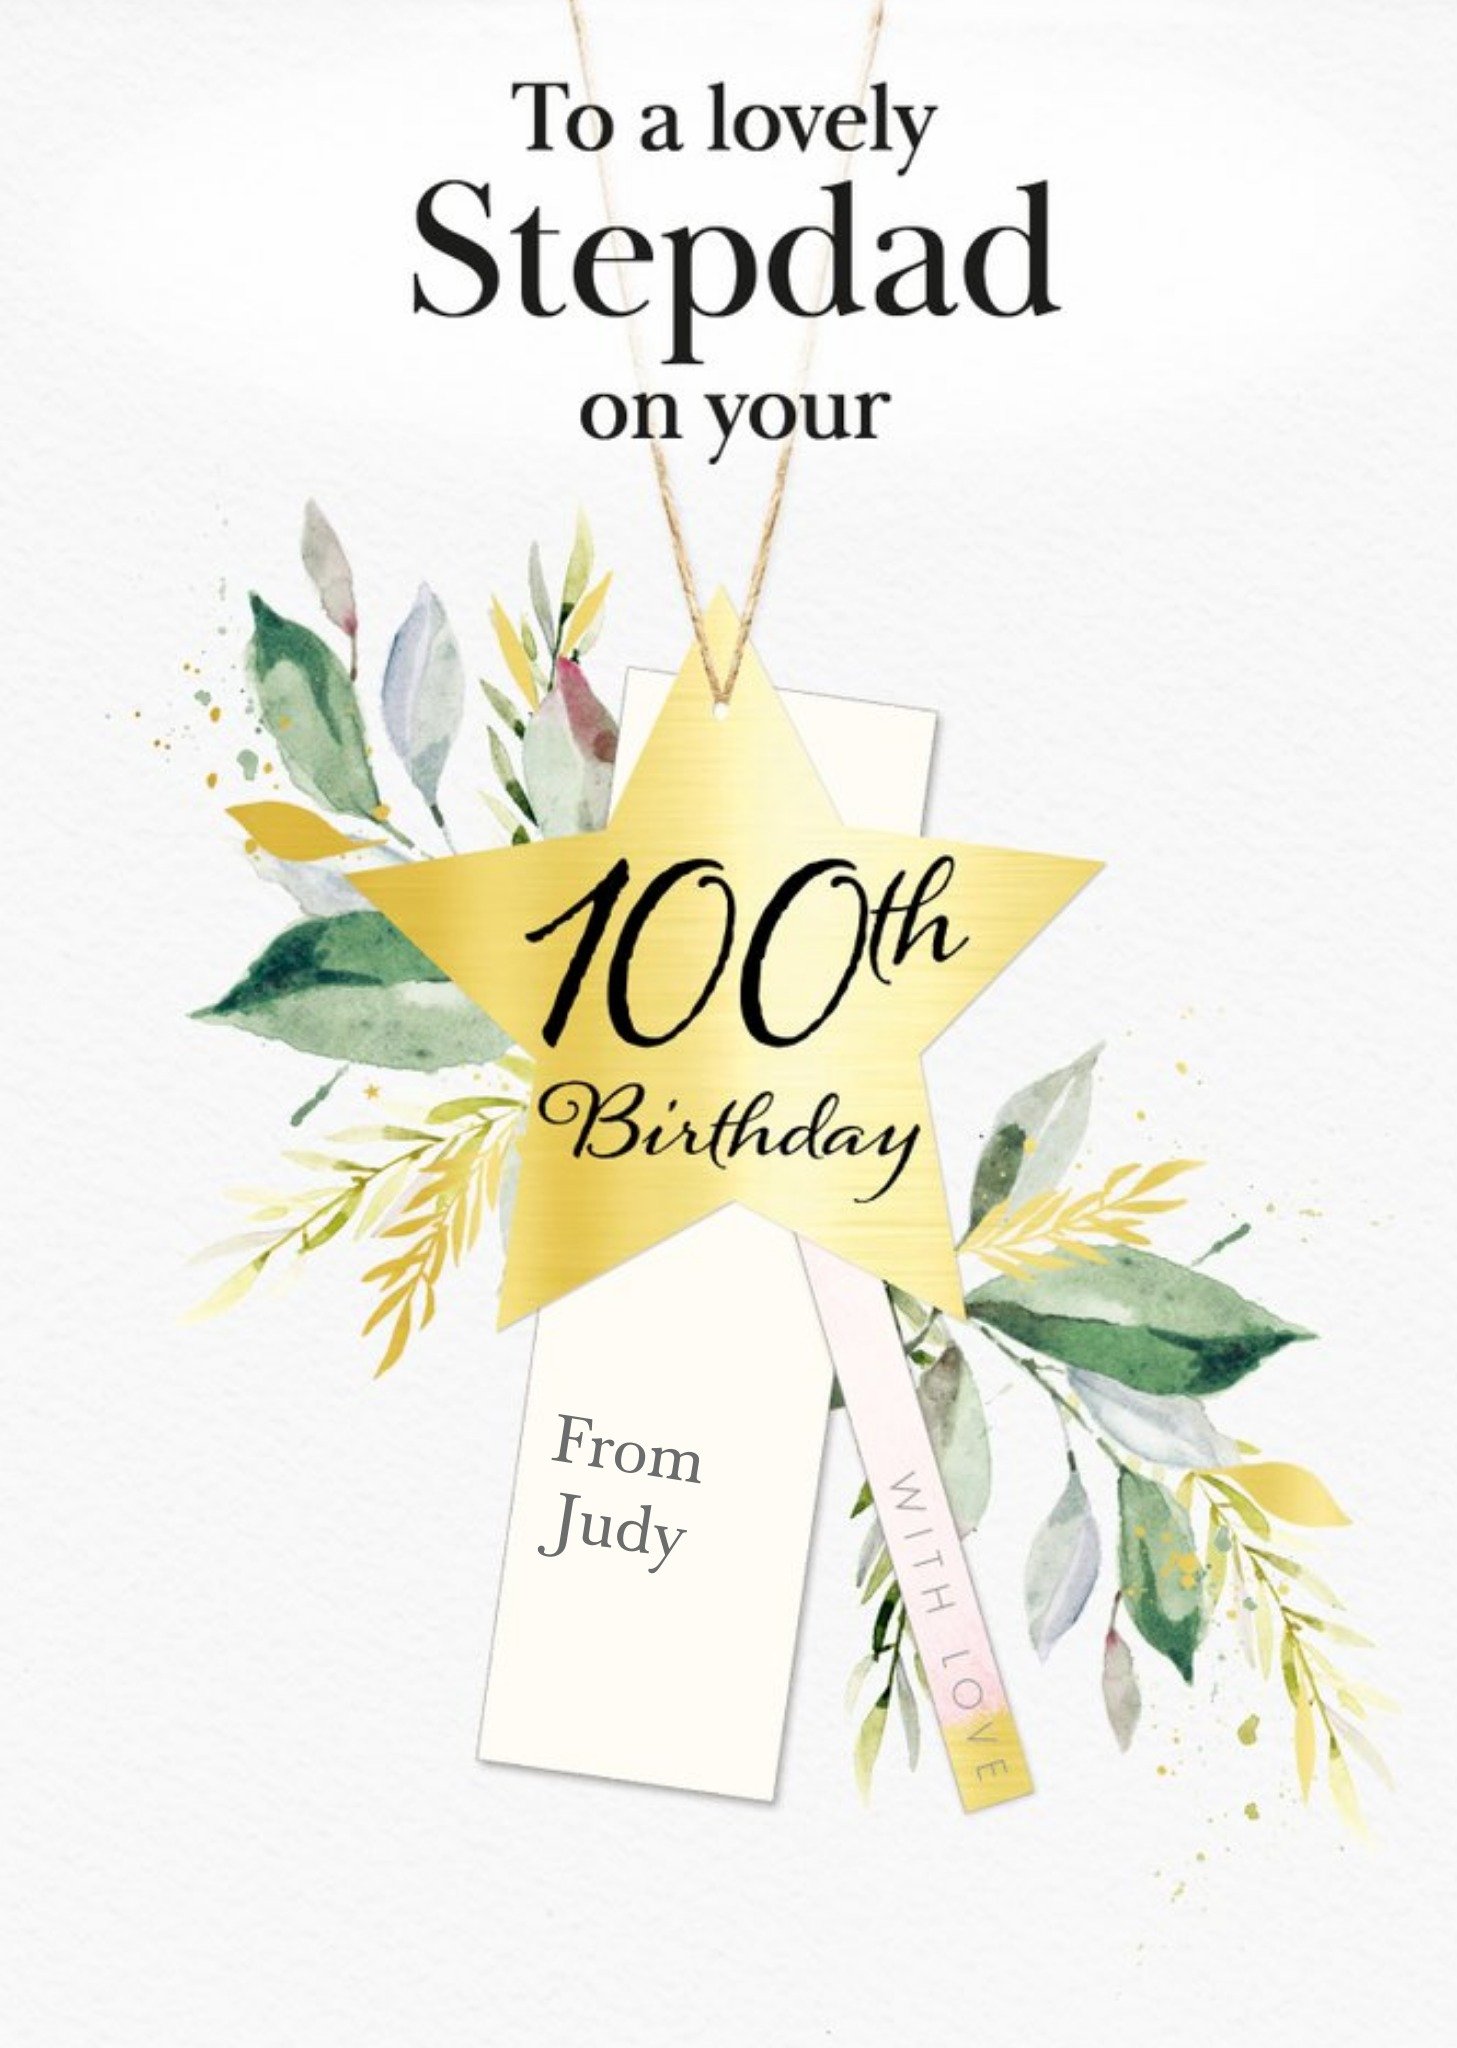 Moonpig Floral Illustration With A Star Shaped Tag Stepdad's One Hundredth Birthday Card Ecard